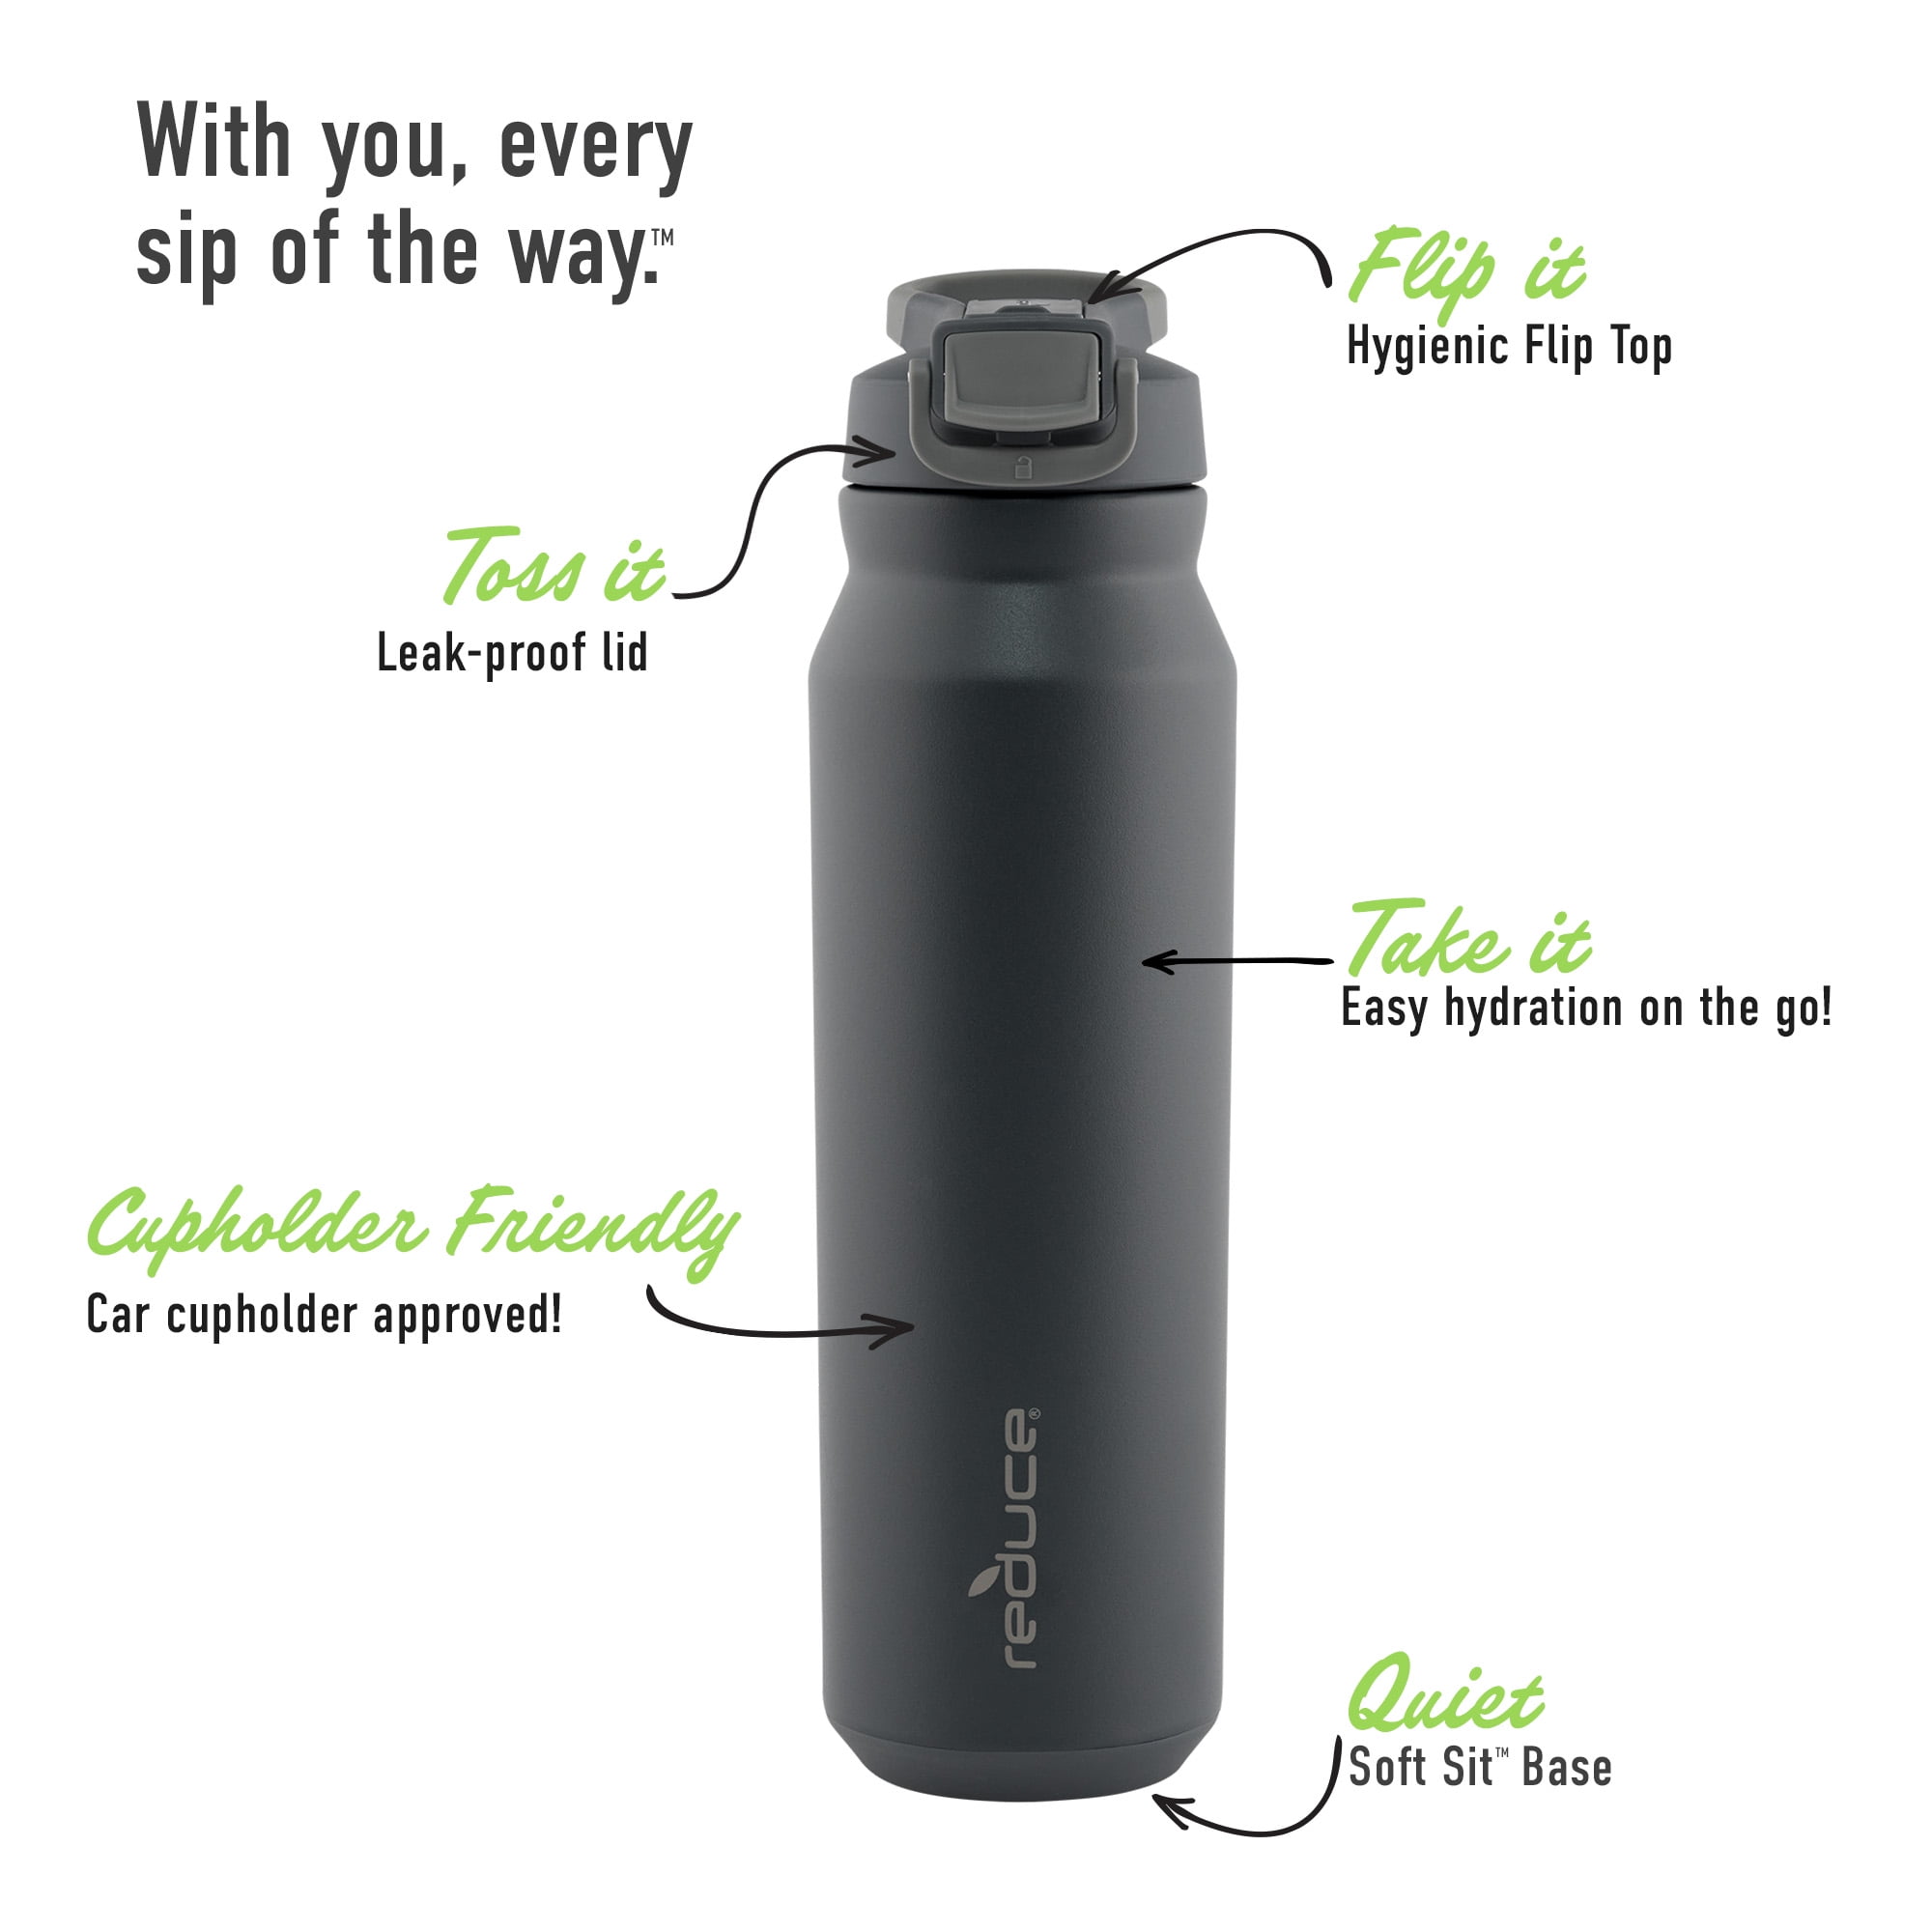 Reduce Vacuum Insulated Stainless Steel Hydrate Pro Water Bottle with Leak-Proof Lid, Glacier, 32 oz